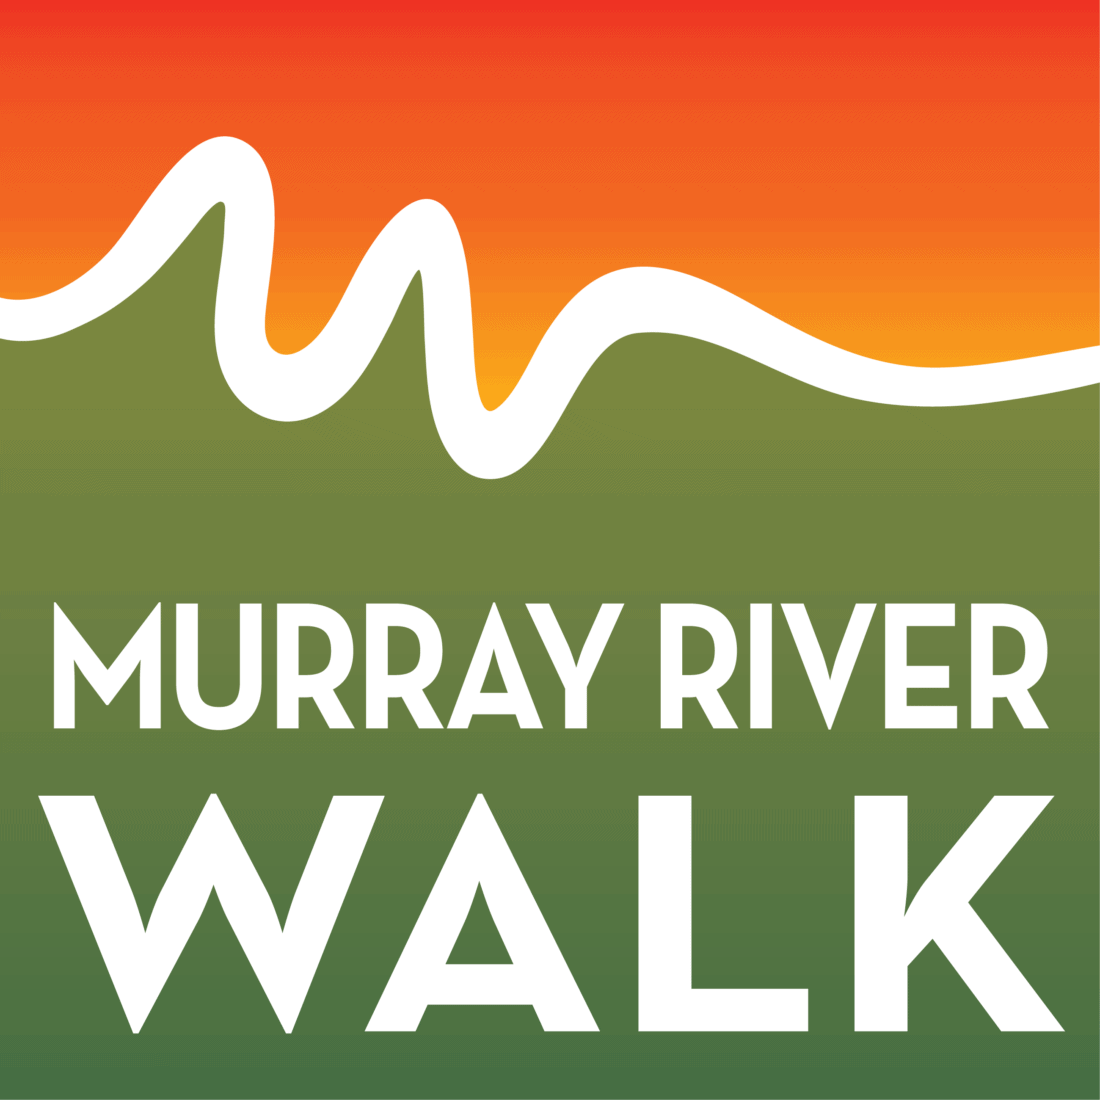 Murray River Walk information about weather conditions and seasonal highlights during walking season